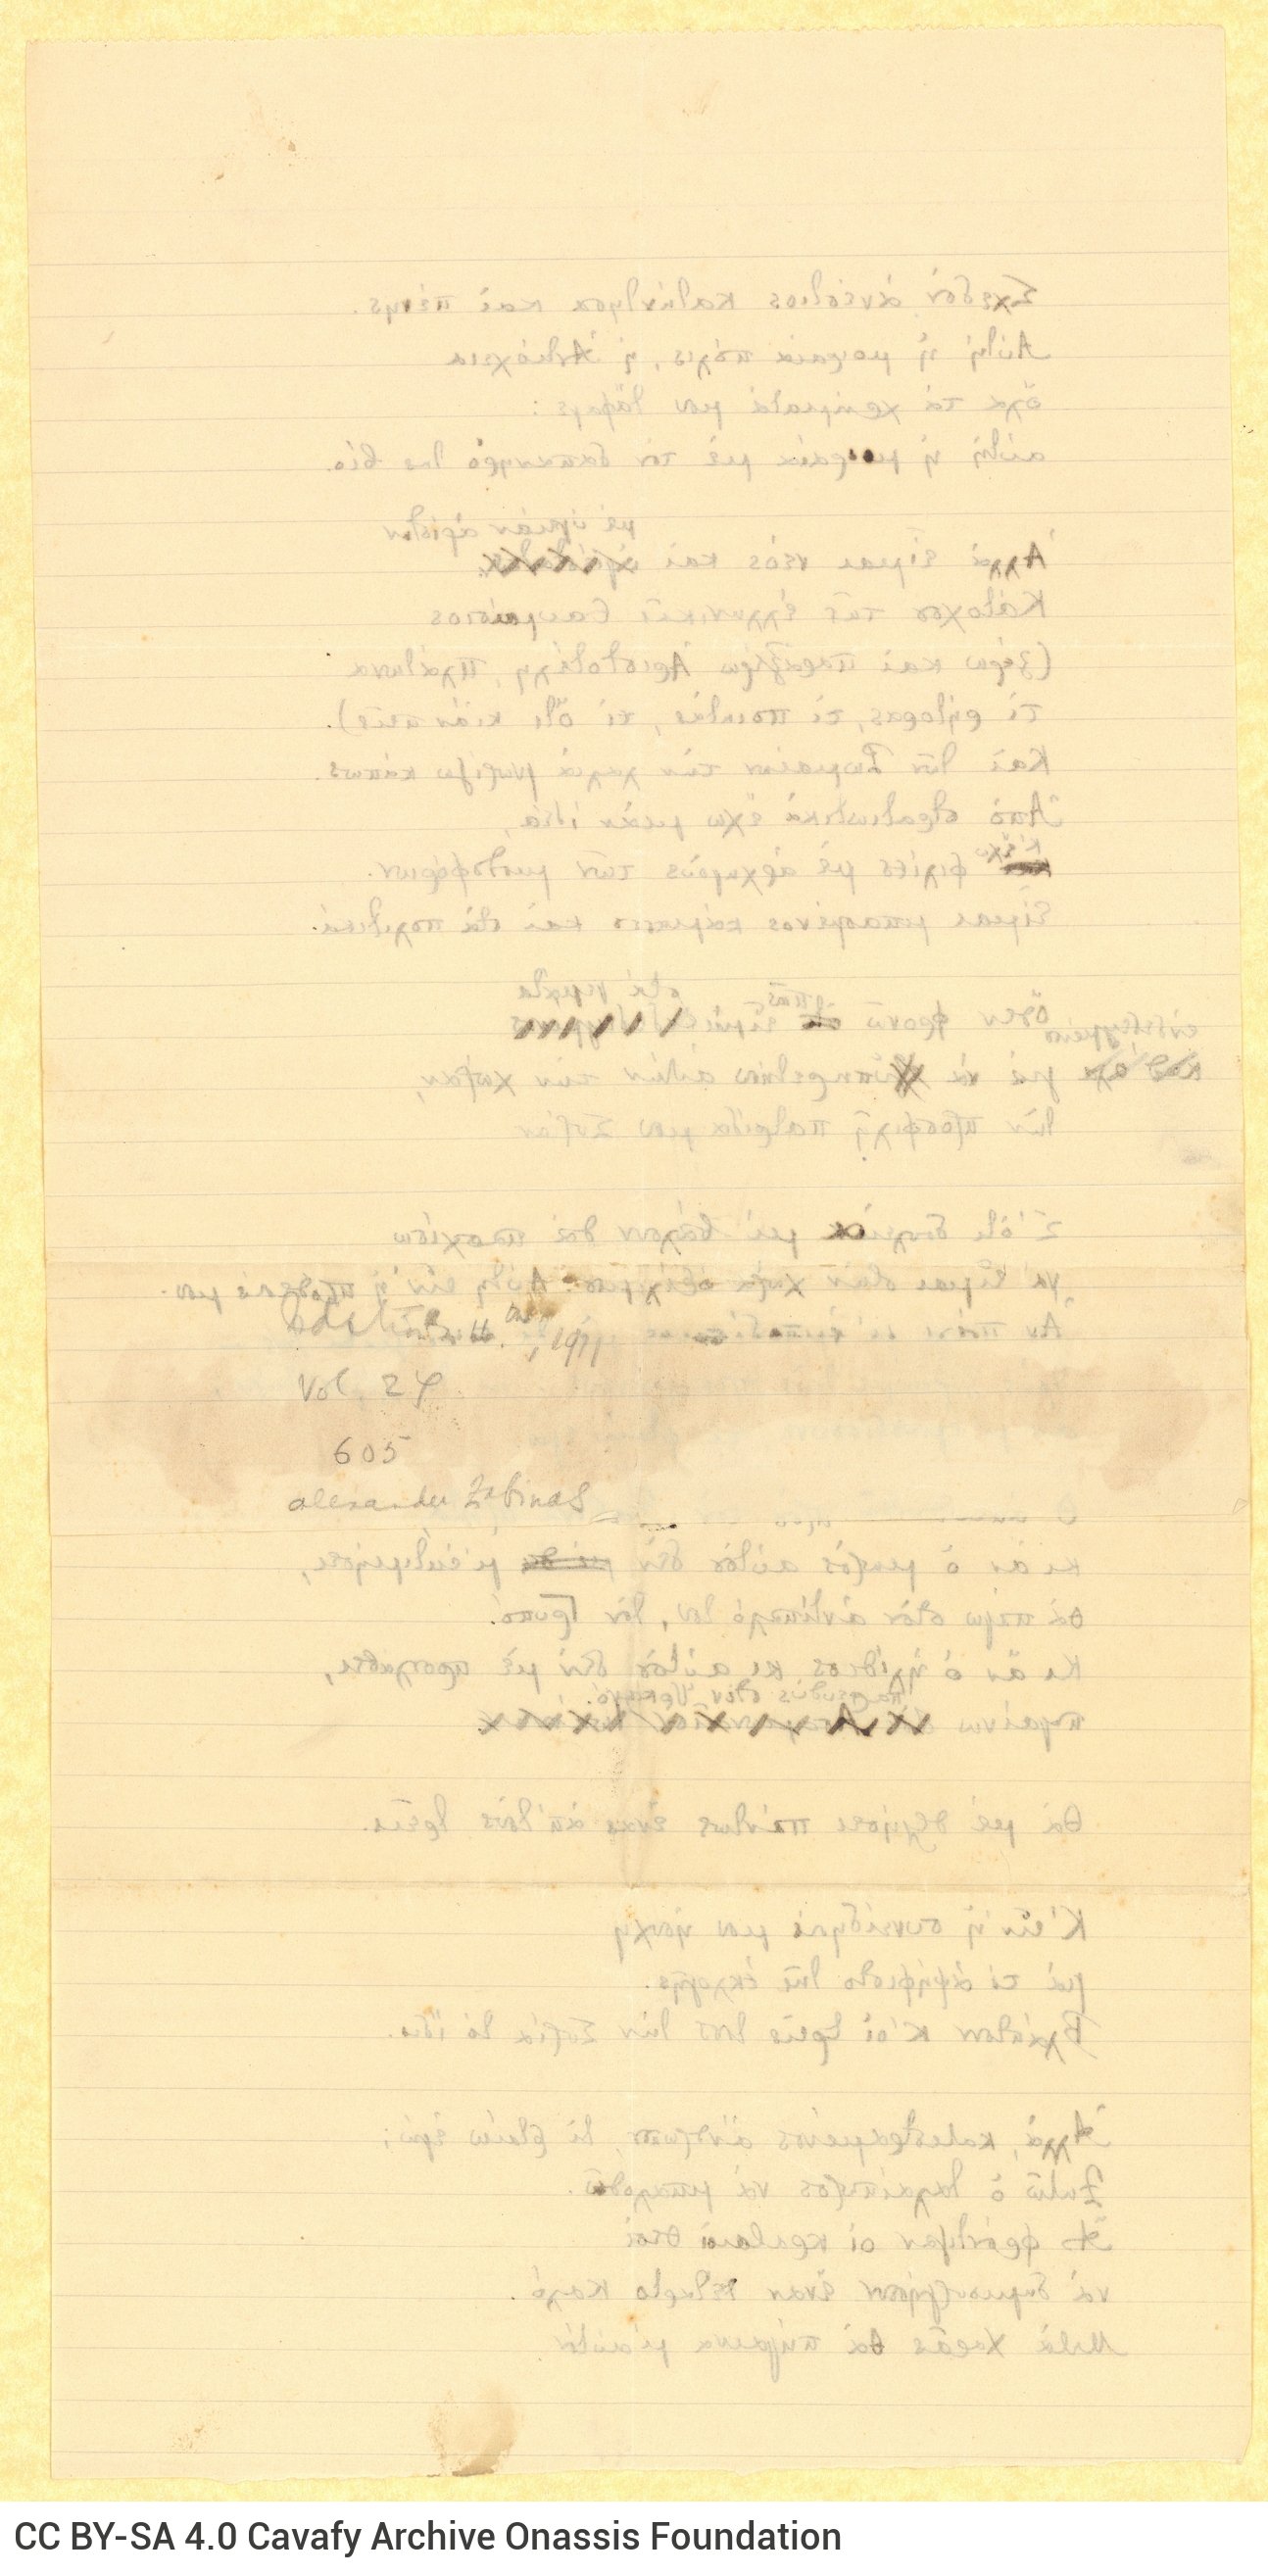 Handwritten untitled poem on one side of two affixed ruled sheets, one underneath the other. Cancellations and emendations